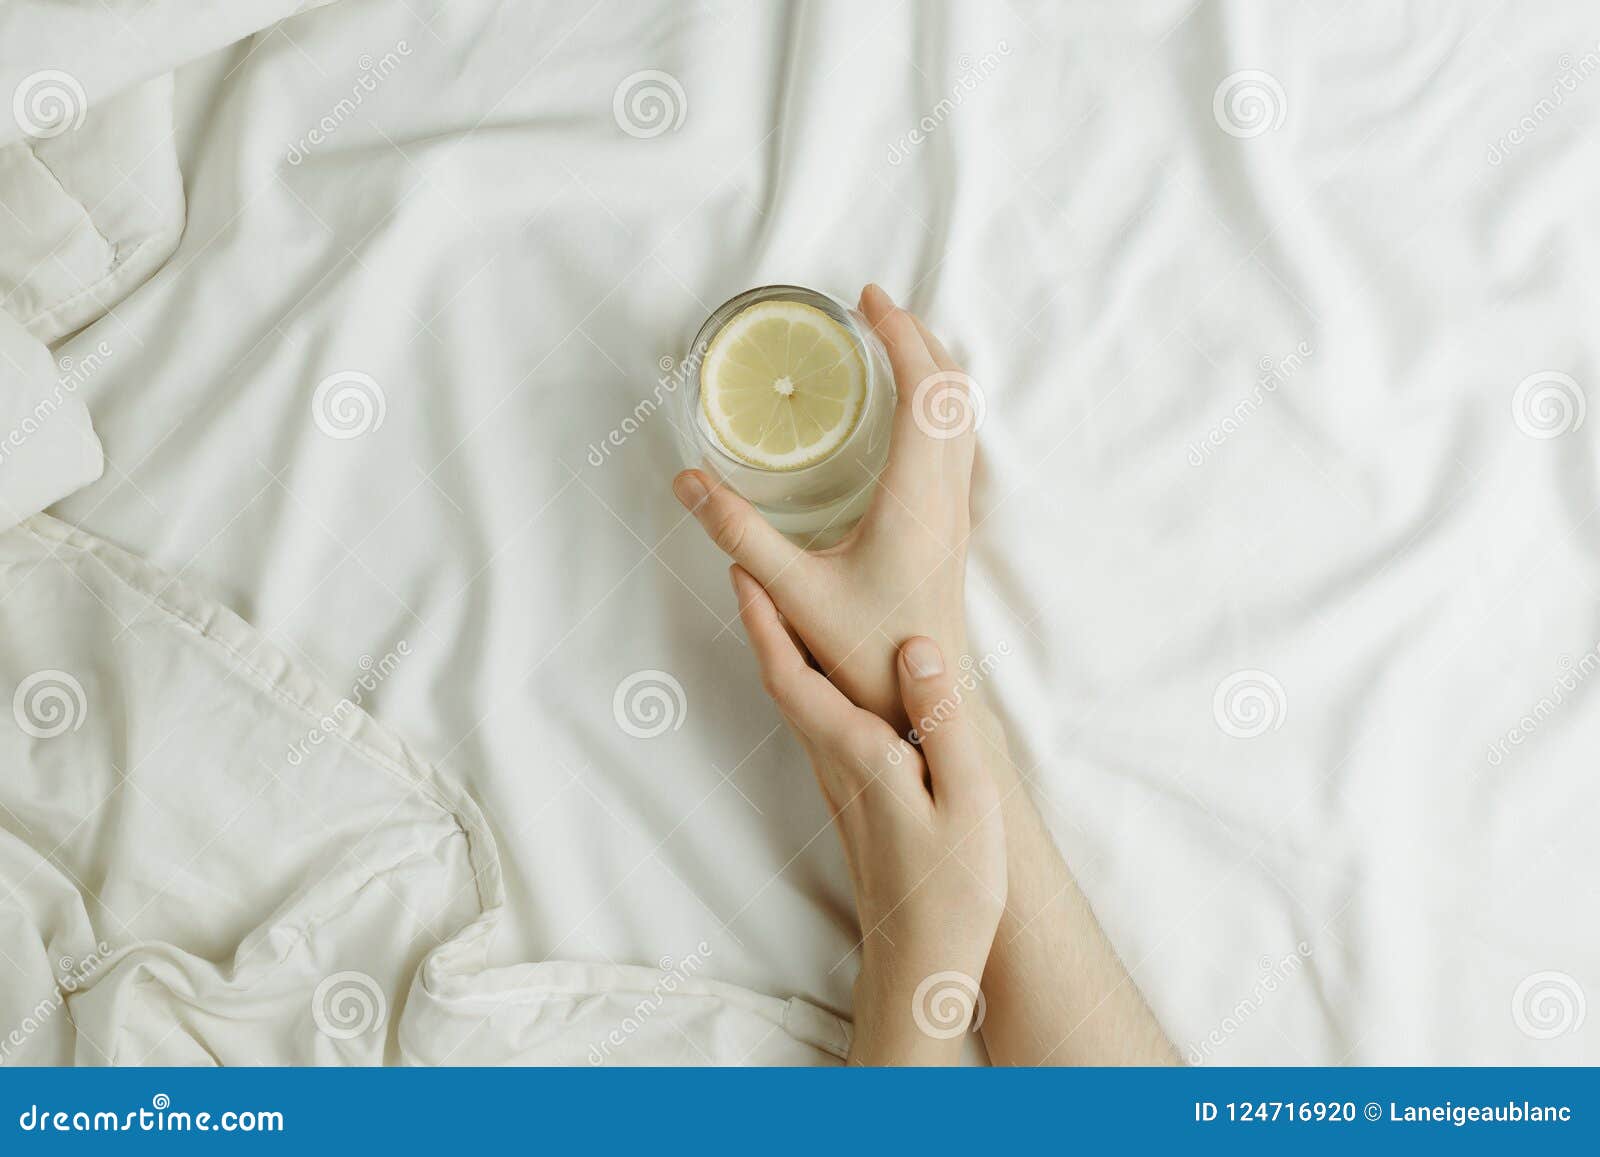 flatlay of woman`s hands holding glass in lemon water in bed on white sheets